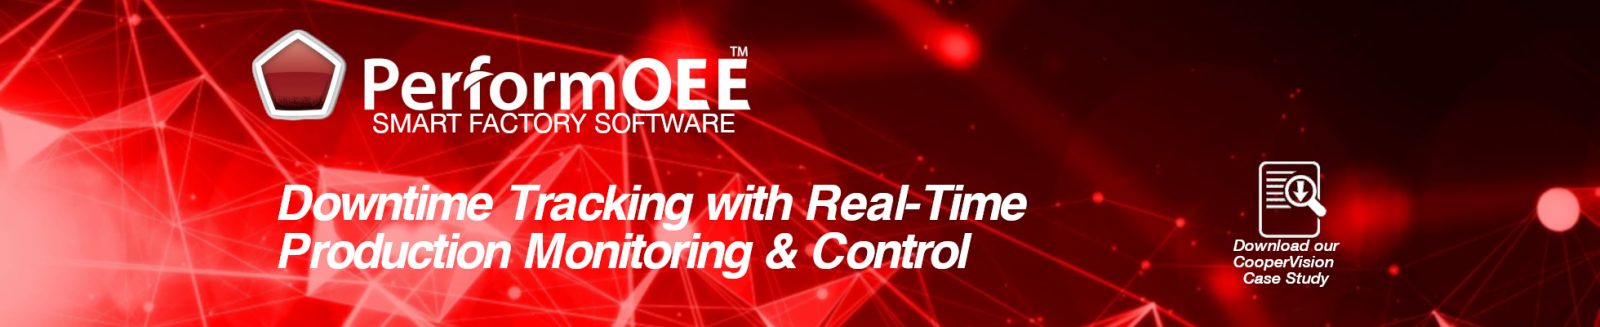 Downtime Tracking with Real-Time Production Monitoring and Control | PerformOEE | OEEsystems